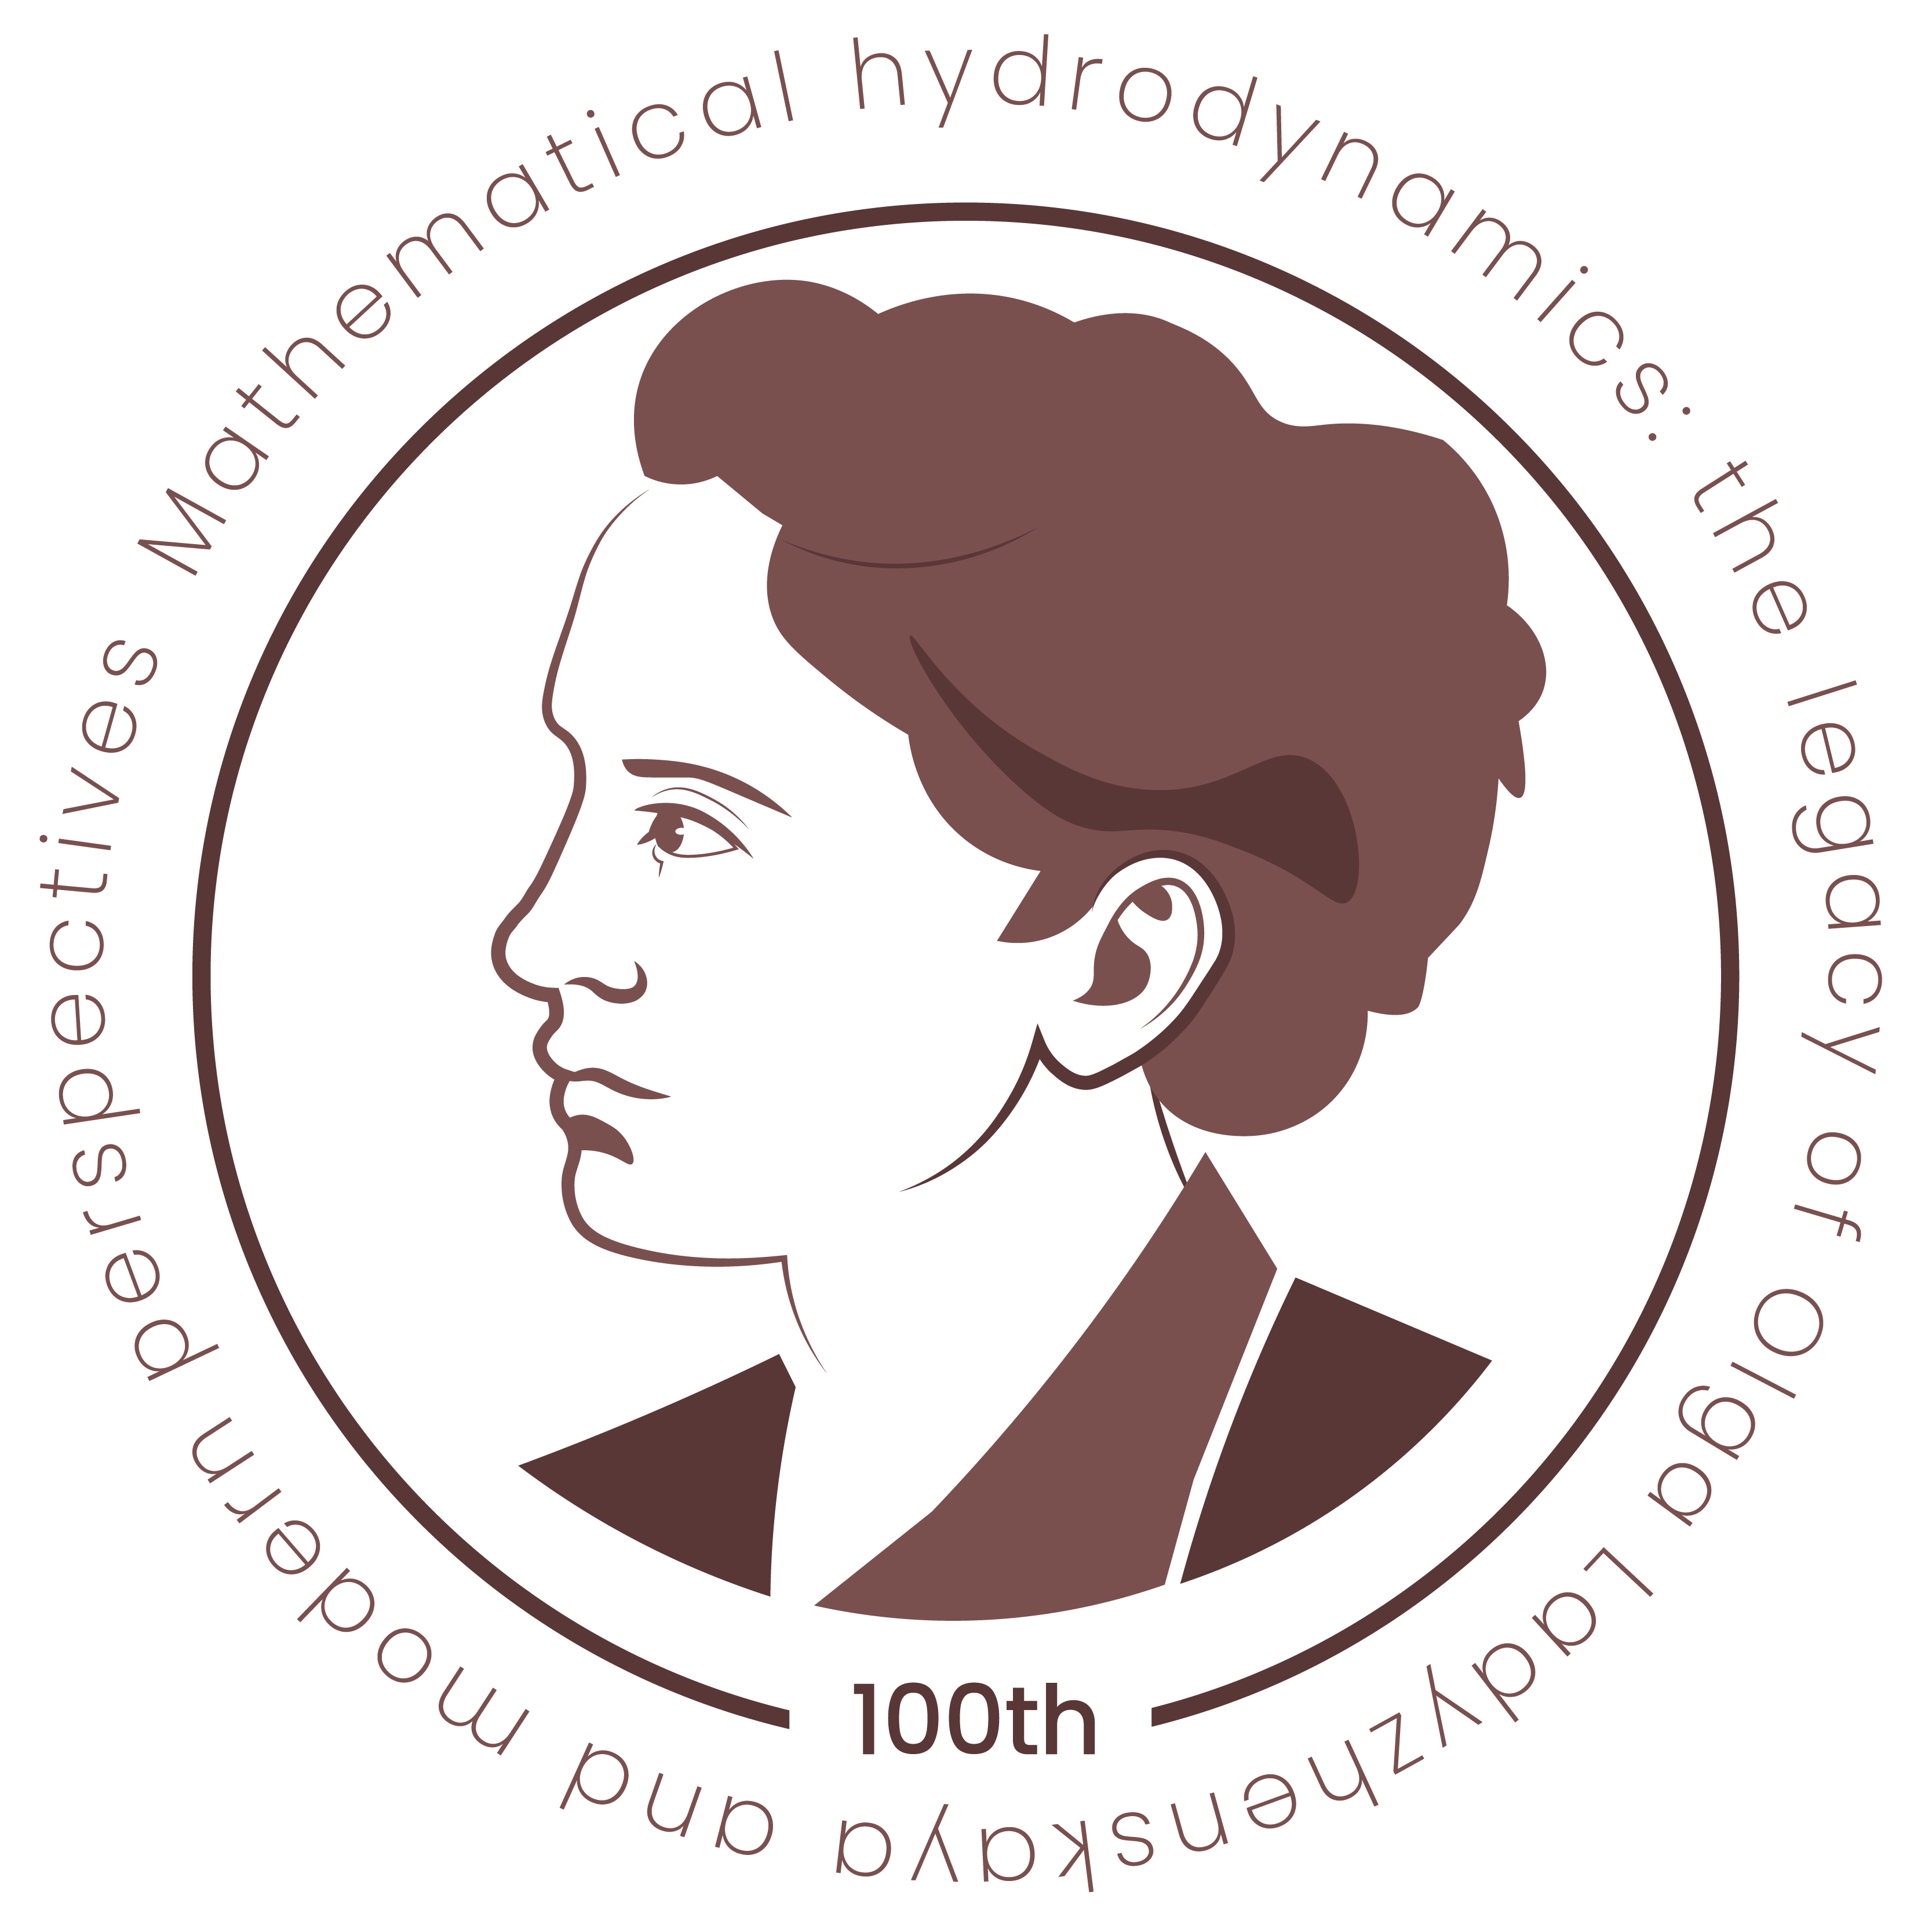 [CANCELLED] Conference "Mathematical hydrodynamics: the legacy of Olga Ladyzhenskaya and modern perspectives"